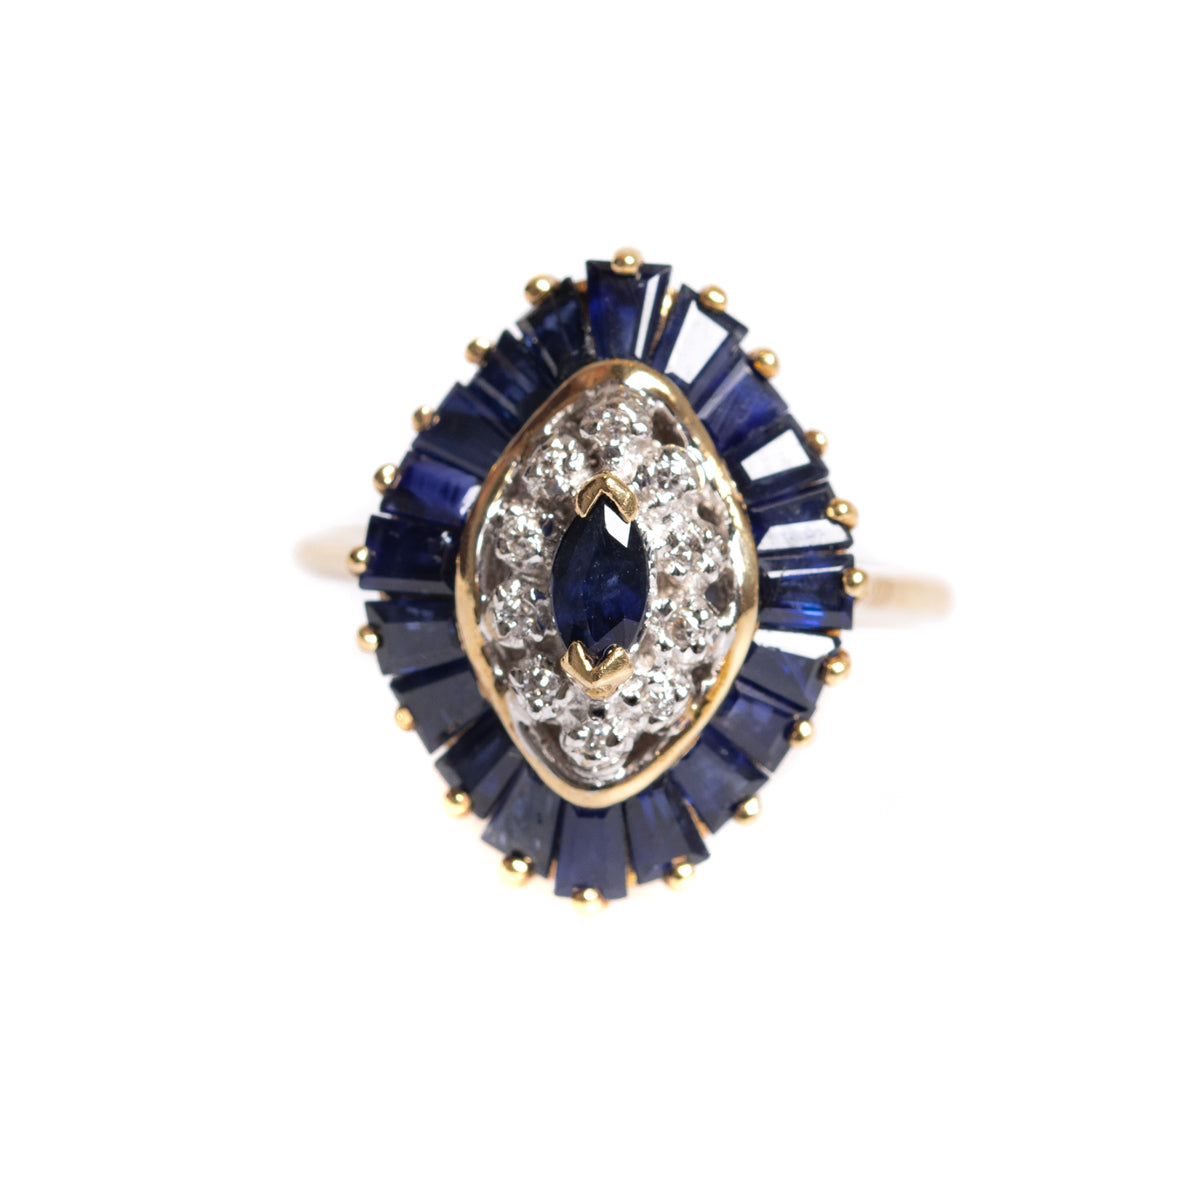 9ct Gold Natural Sapphire & Diamond Gemstone Cocktail Ring Halo Design UK Size M (A1403)